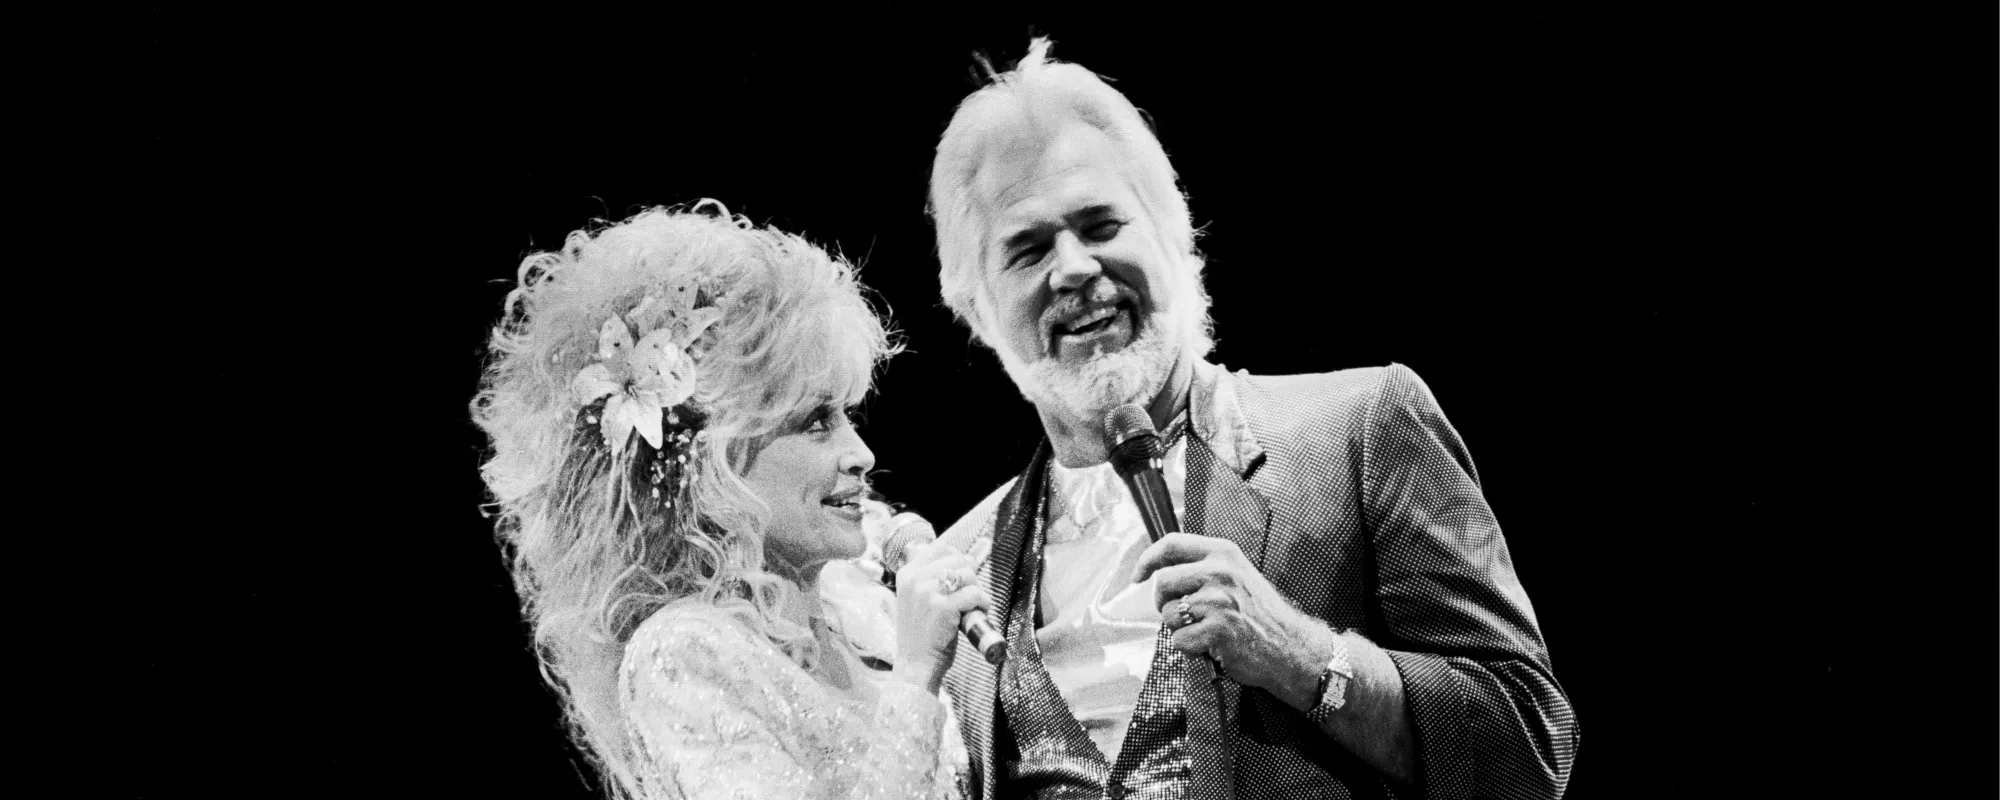 Dolly Parton Reflects on Three-Year Anniversary of Kenny Roger’s Death: “I Miss Him So Much”